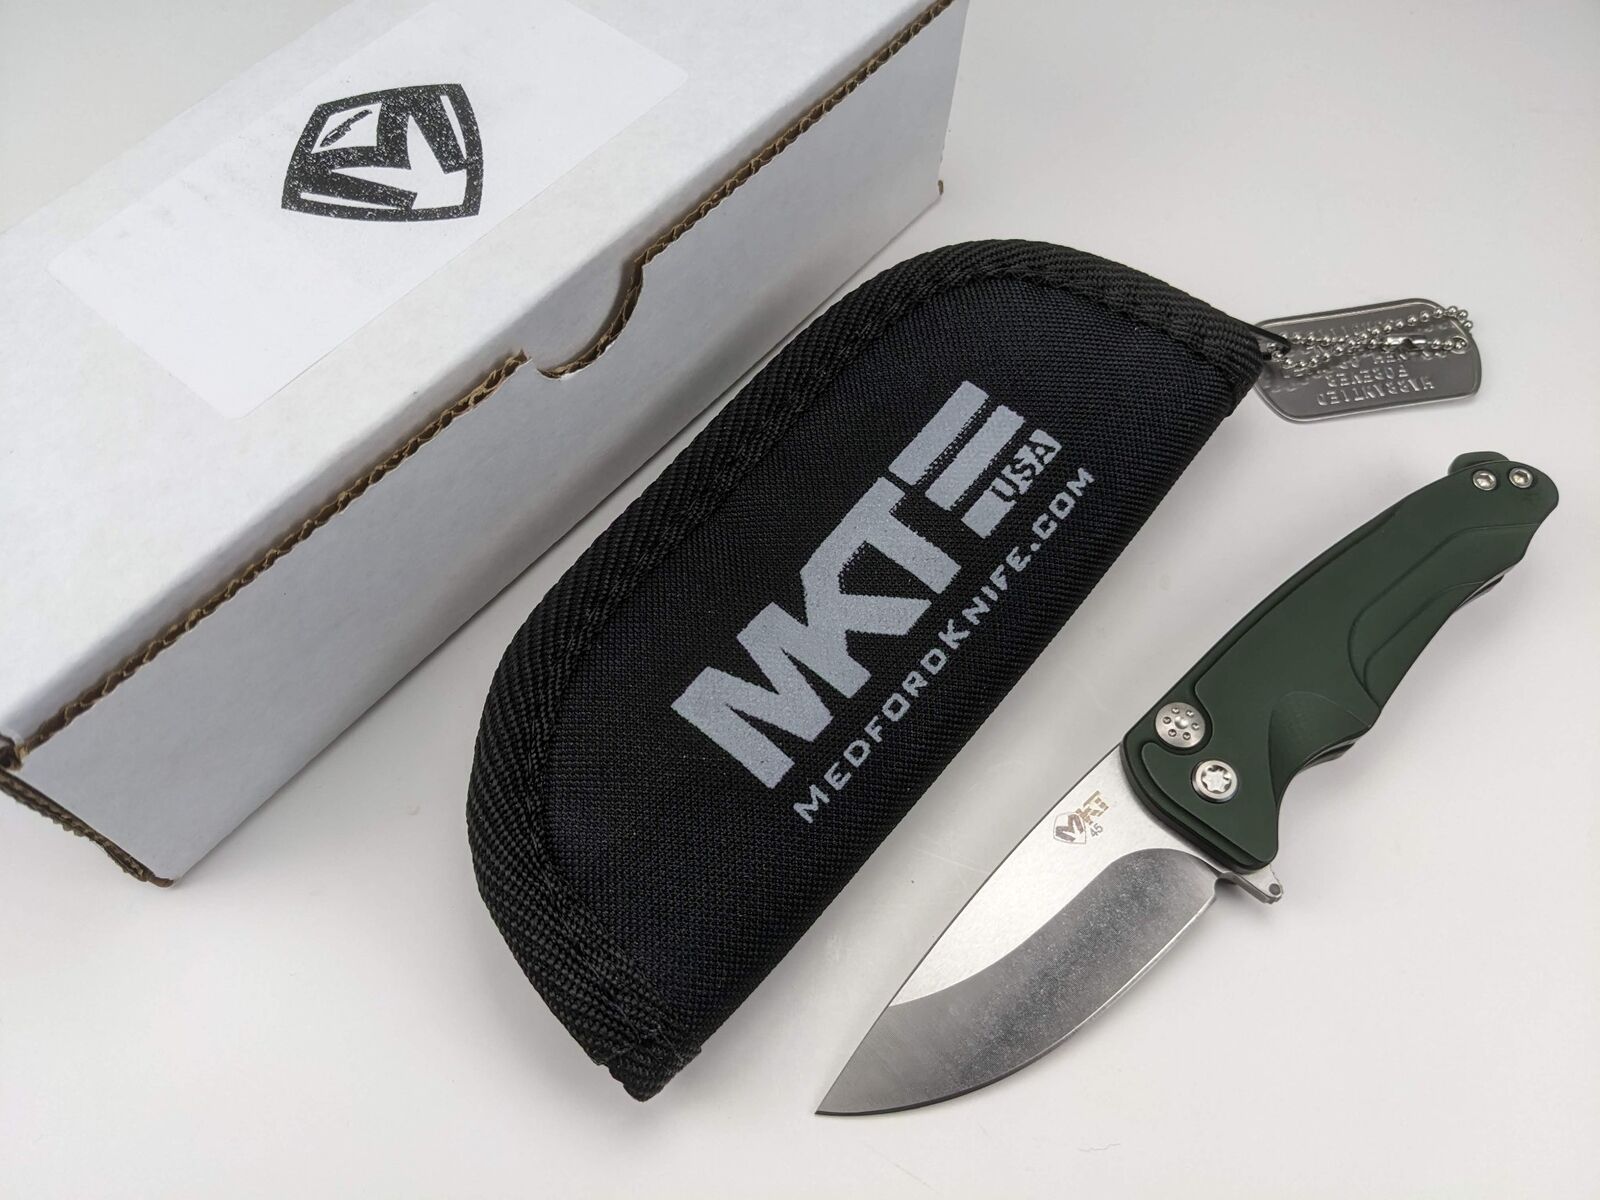 Medford Knife - Smooth Criminal - Button Lock - Green Handle - S45VN Steel - USA